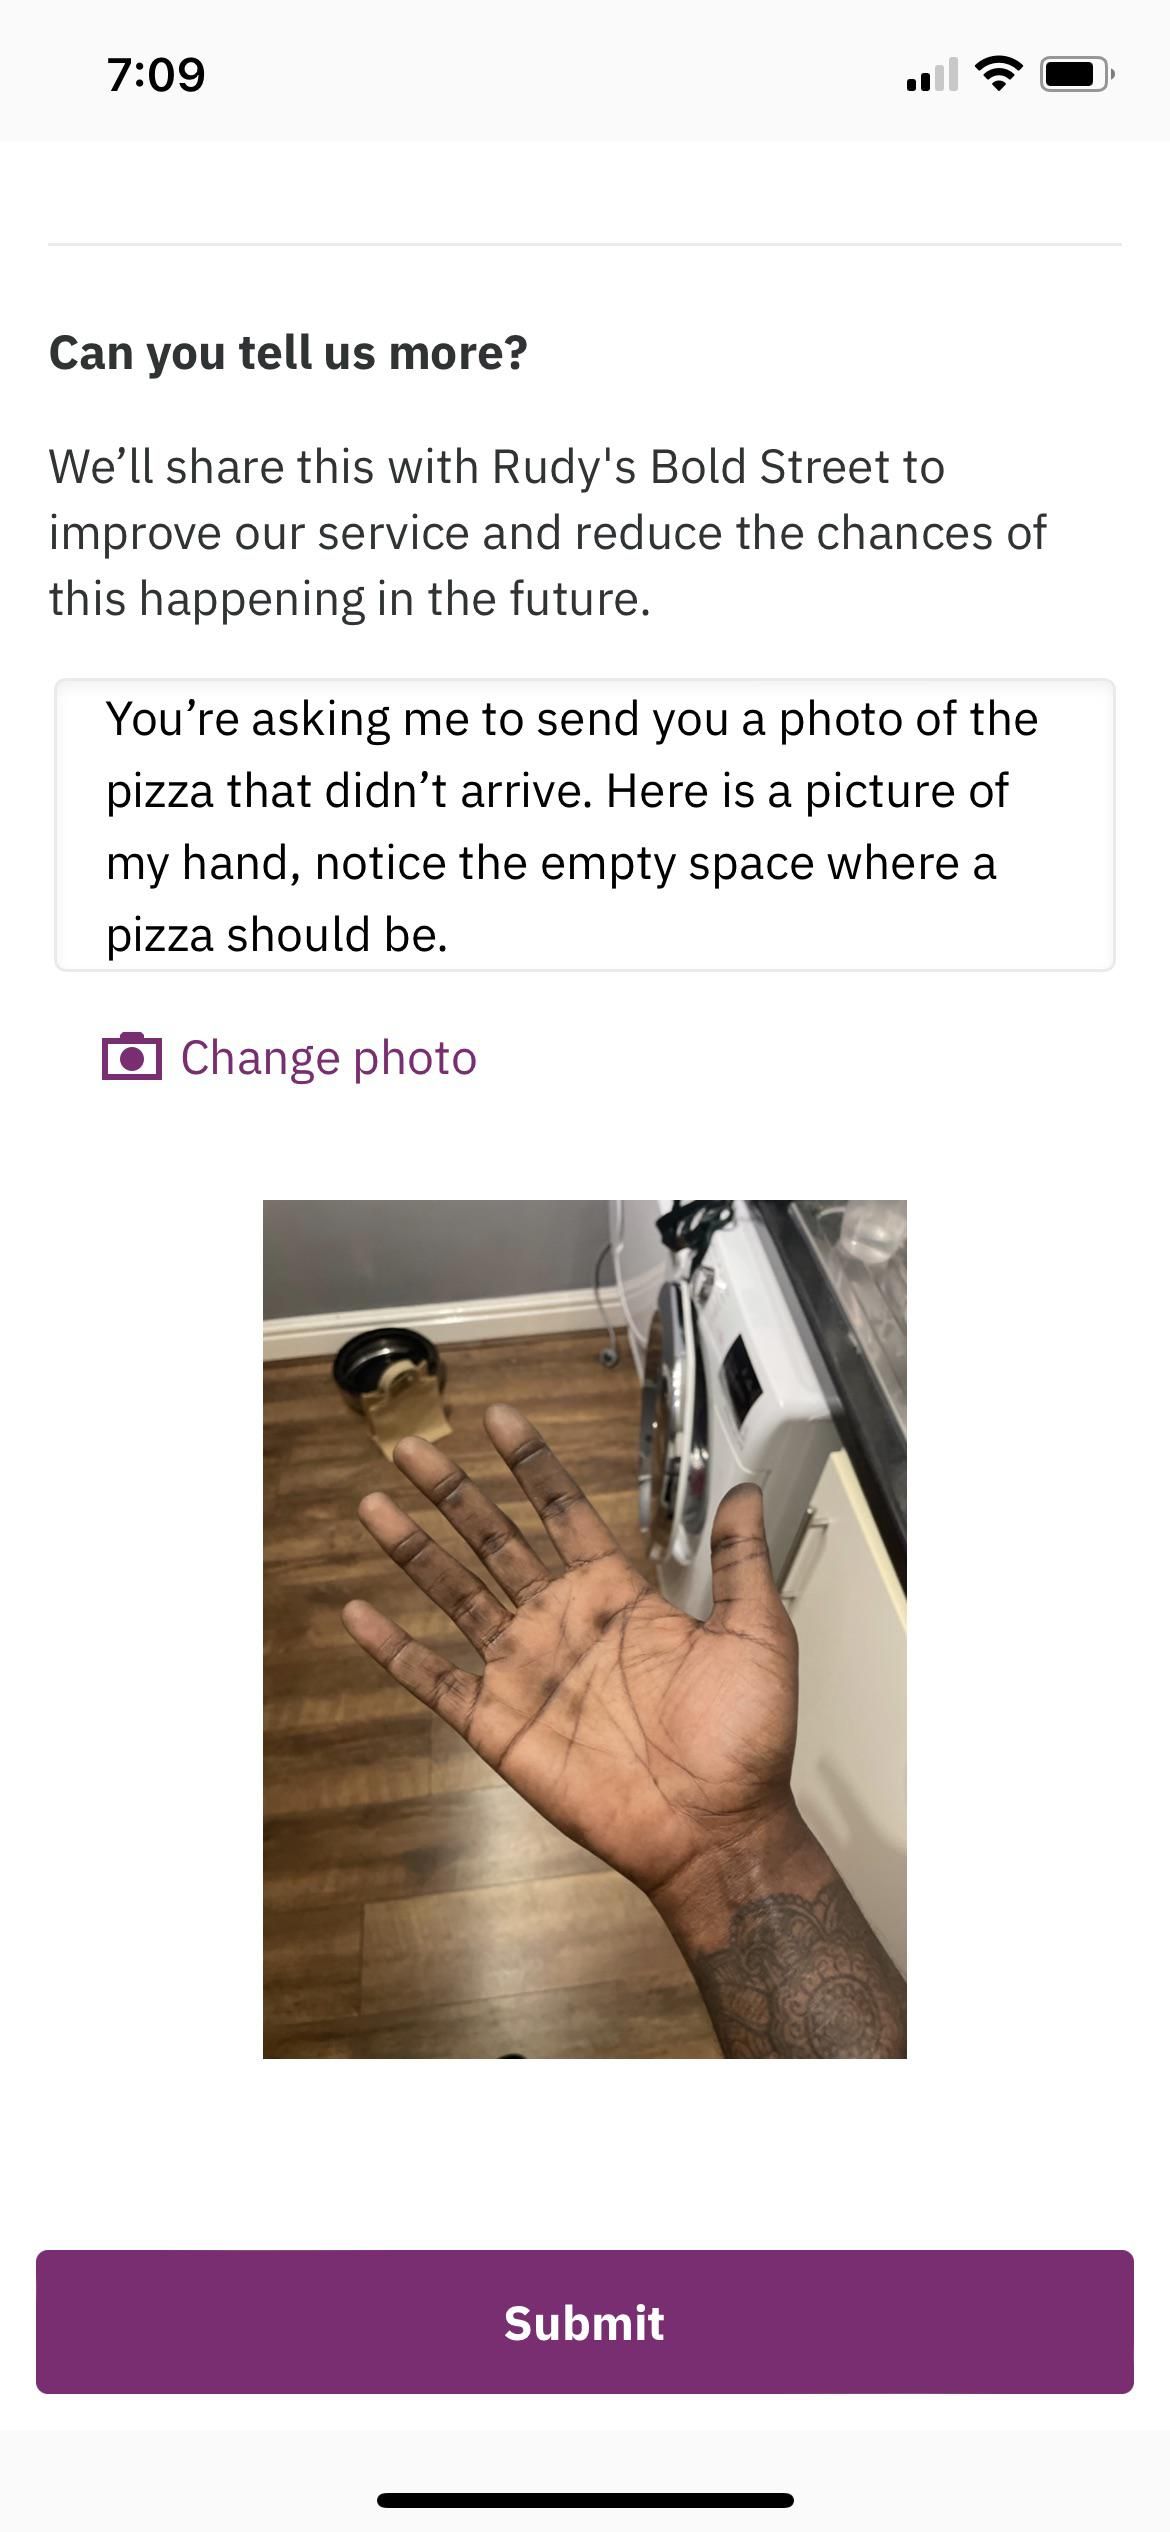 My pizza never arrived and they asked for photographic proof.